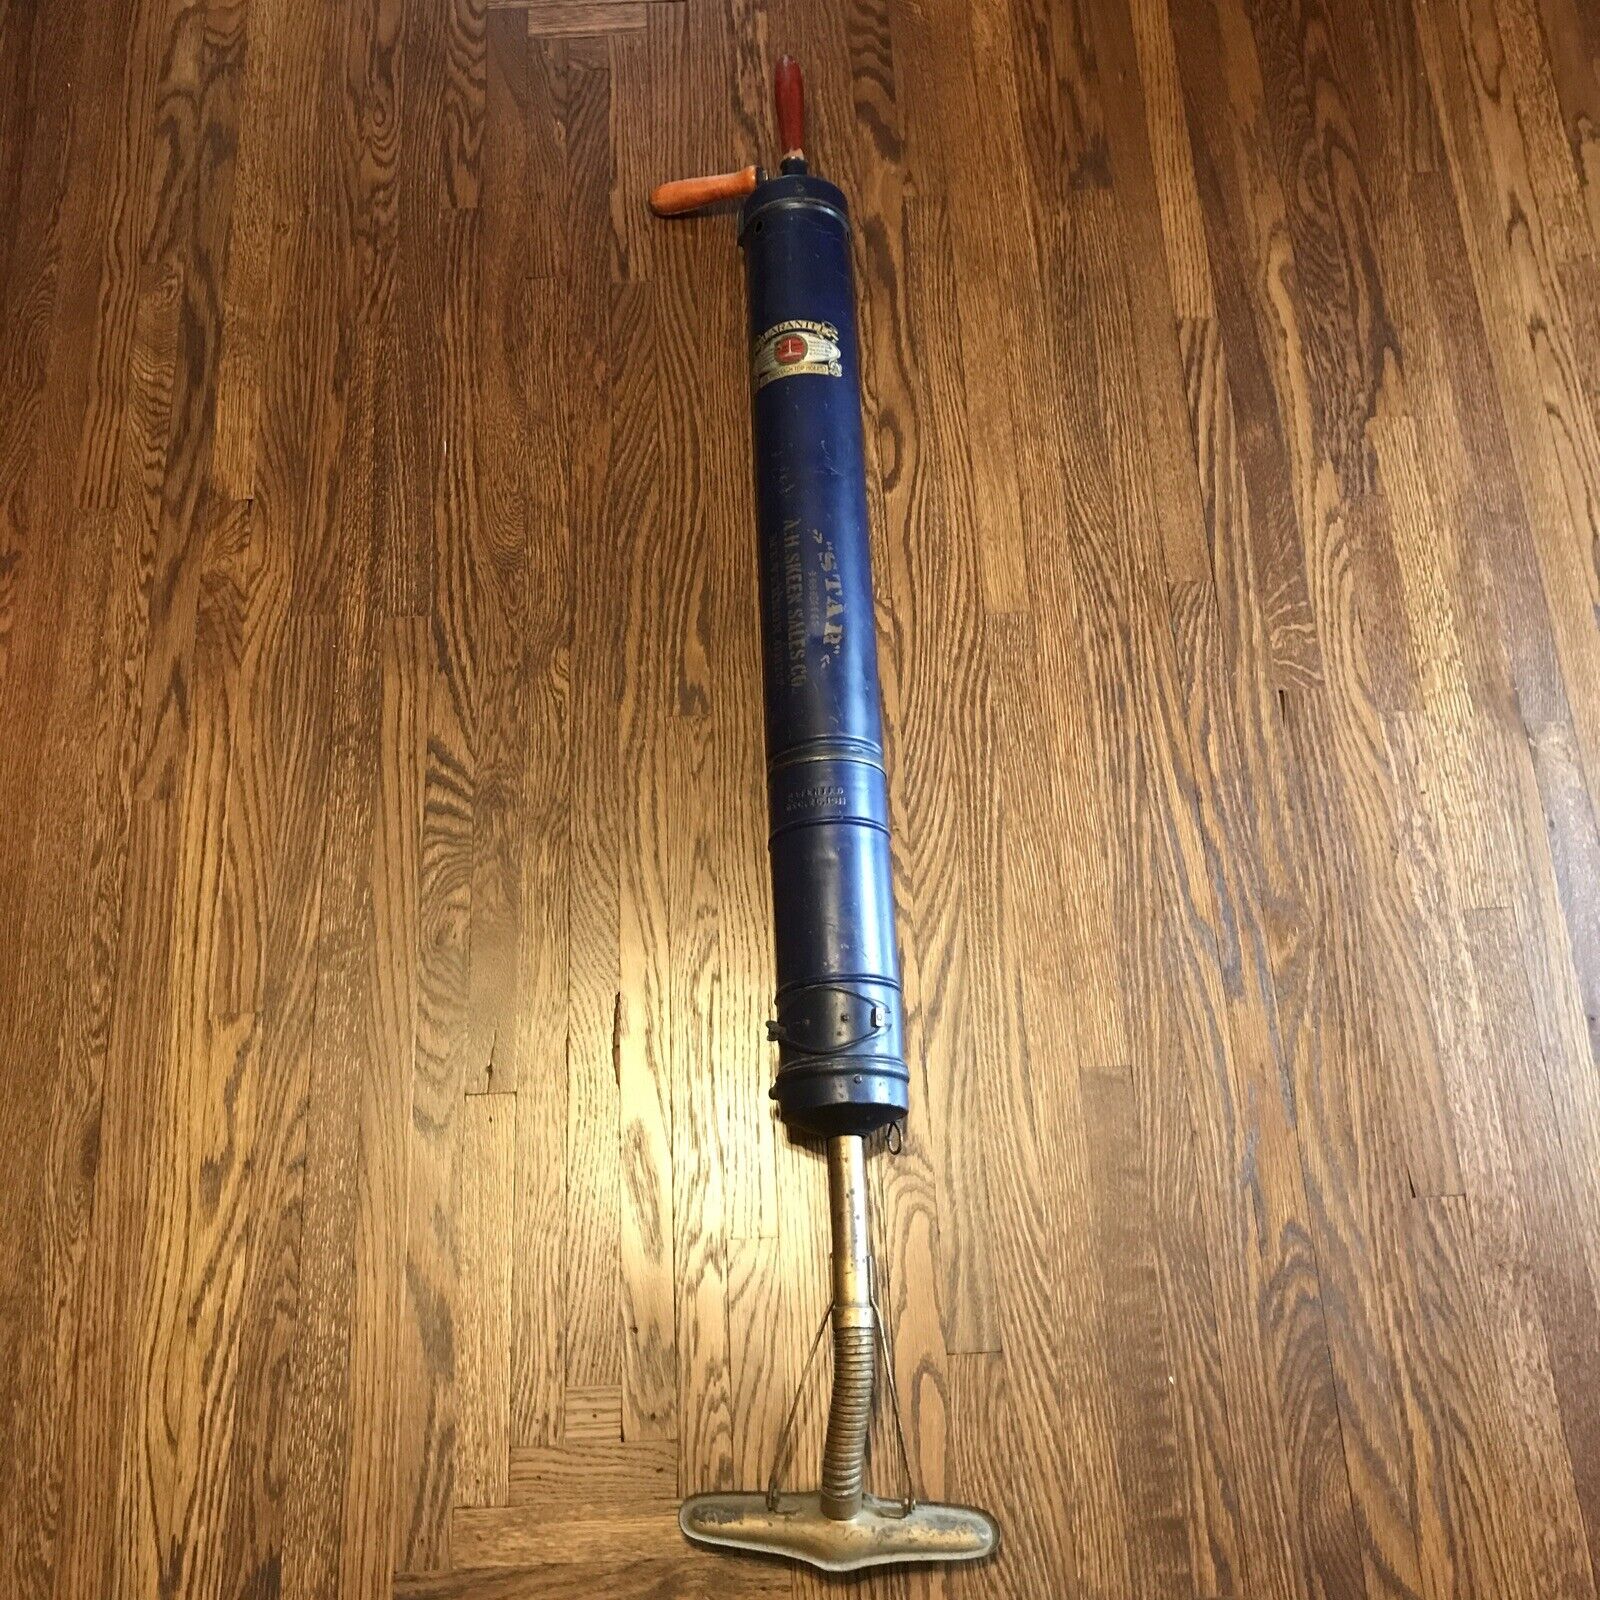 Vintage Cordless Vacuum Star A.H. Skee Sales Co Mt. Vernon Ohio Not Working Very